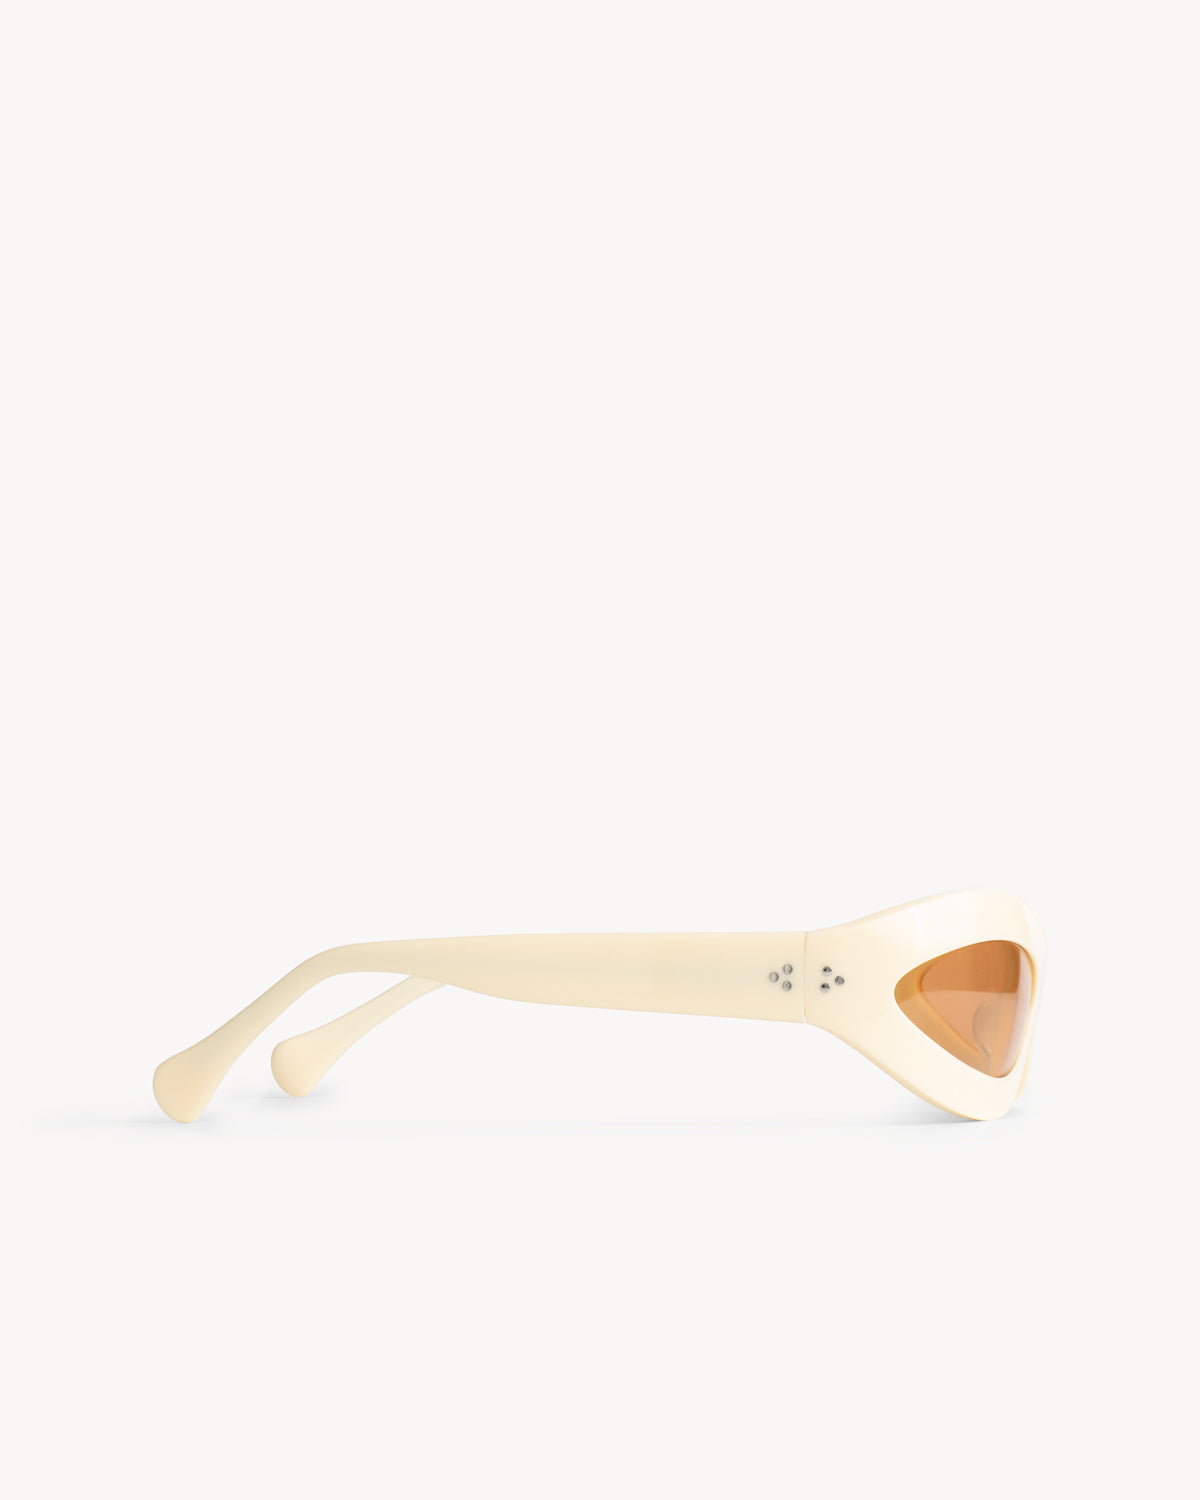 Port Tanger Summa Sunglasses in Parchment Acetate and Amber Lenses 4